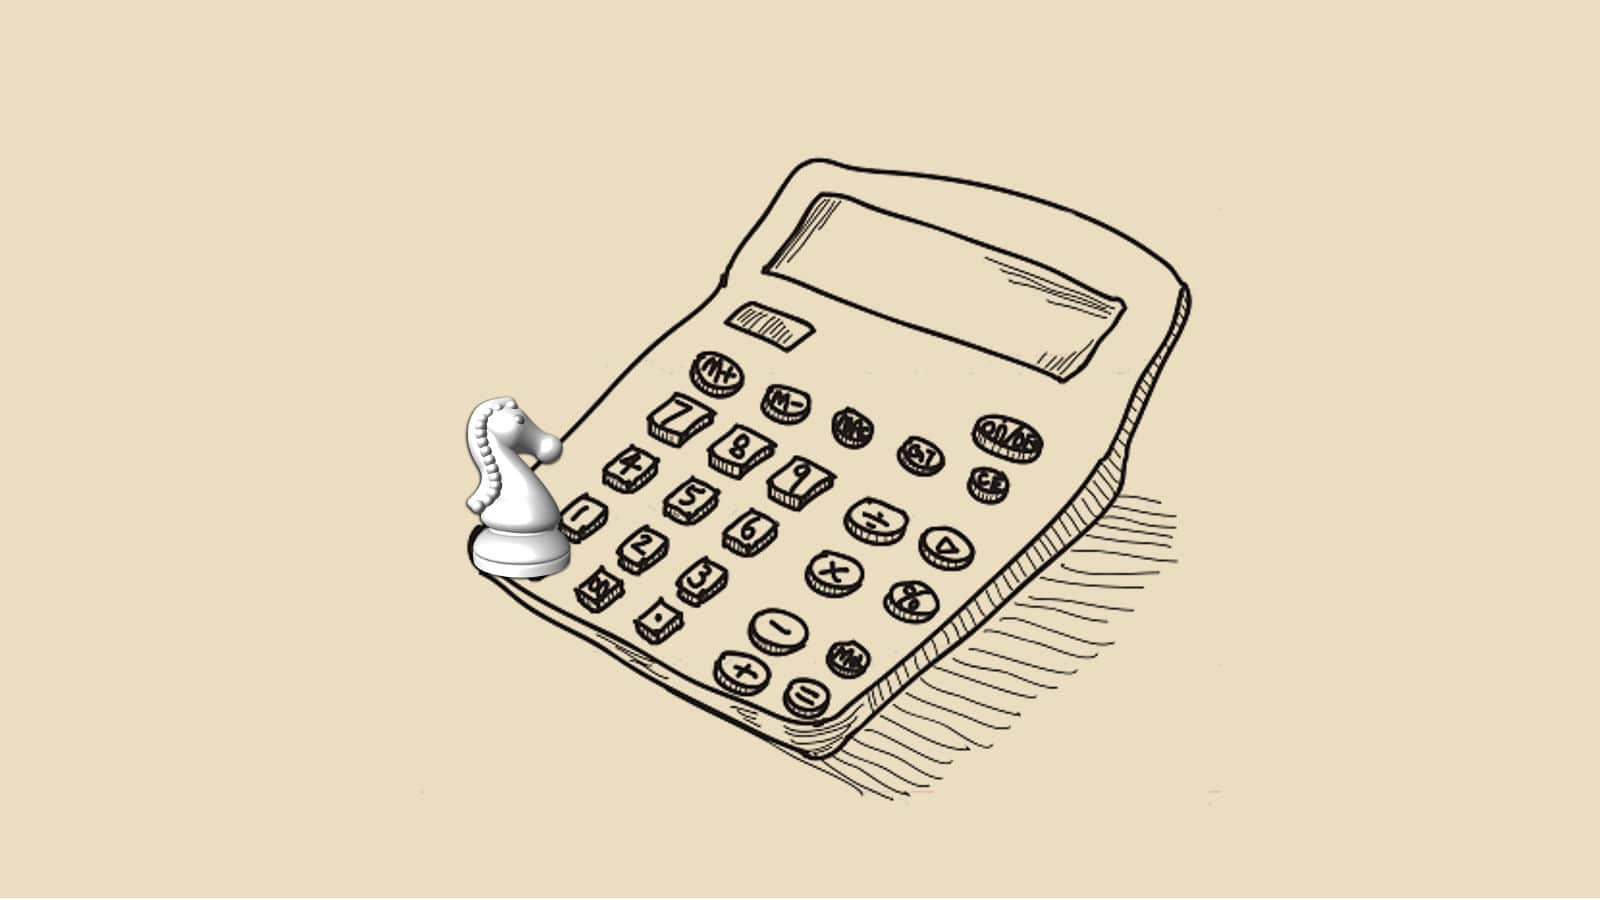 Knight and Calculator Keypad Riddle